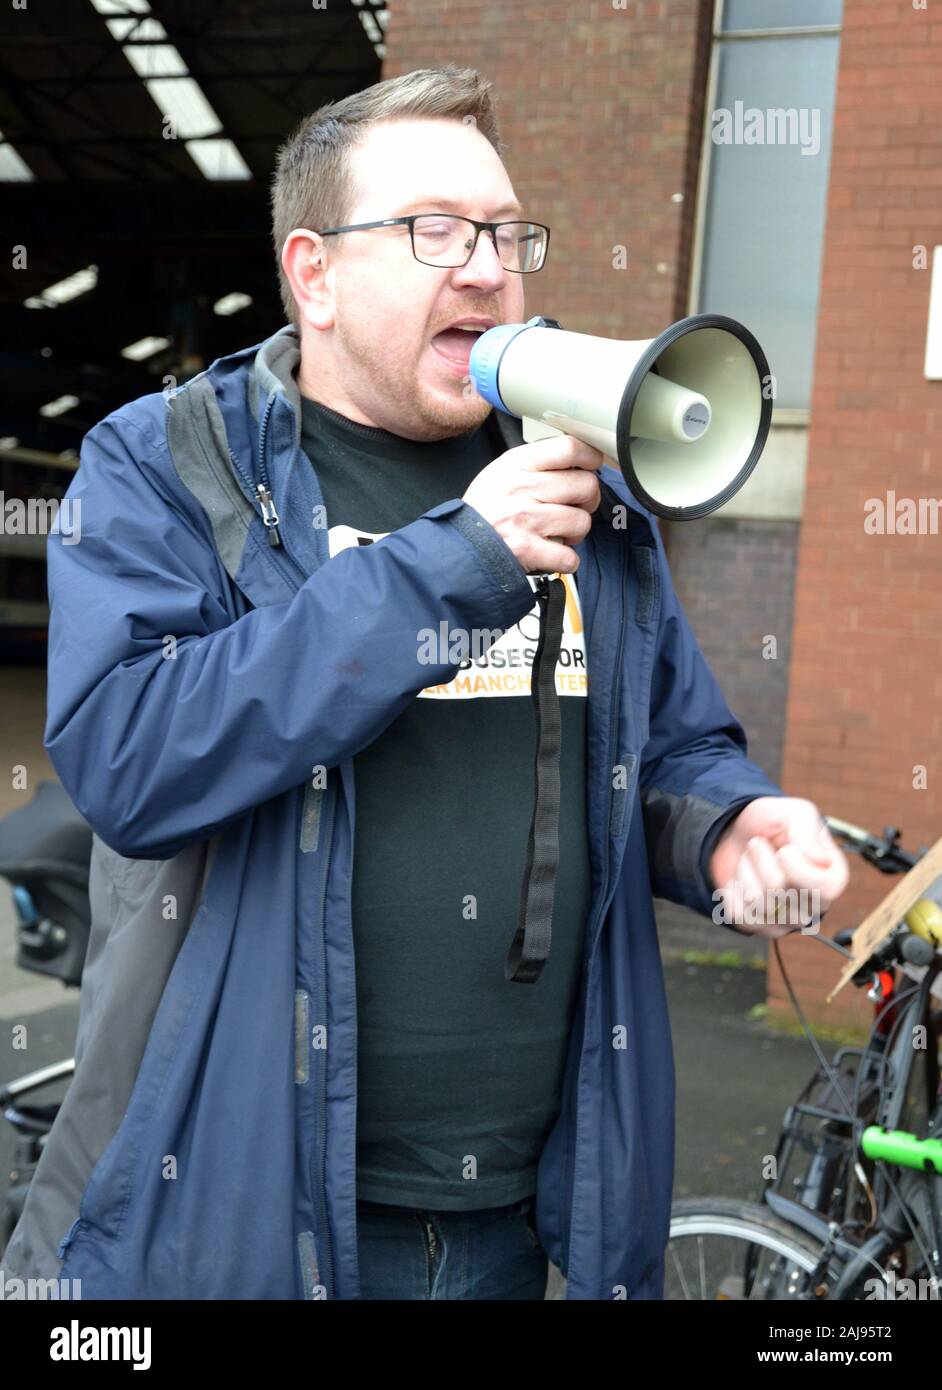 Andrew Gwynne, Labour MP for Denton and Reddish in Greater Manchester and Shadow Secretary of State for Communities and Local Government, speaking to a group of some 25 protesters demanding better bus services which marched through Manchester, United Kingdom, on January 3, 2020. The group marched from the Stagecoach bus depot in Ardwick to the office of the Mayor of Greater Manchester, Andy Burnham, on Oxford Road, to hand in a petition of 11,510 signatures. The protesters called for bus services to be brought back into public control. Stock Photo